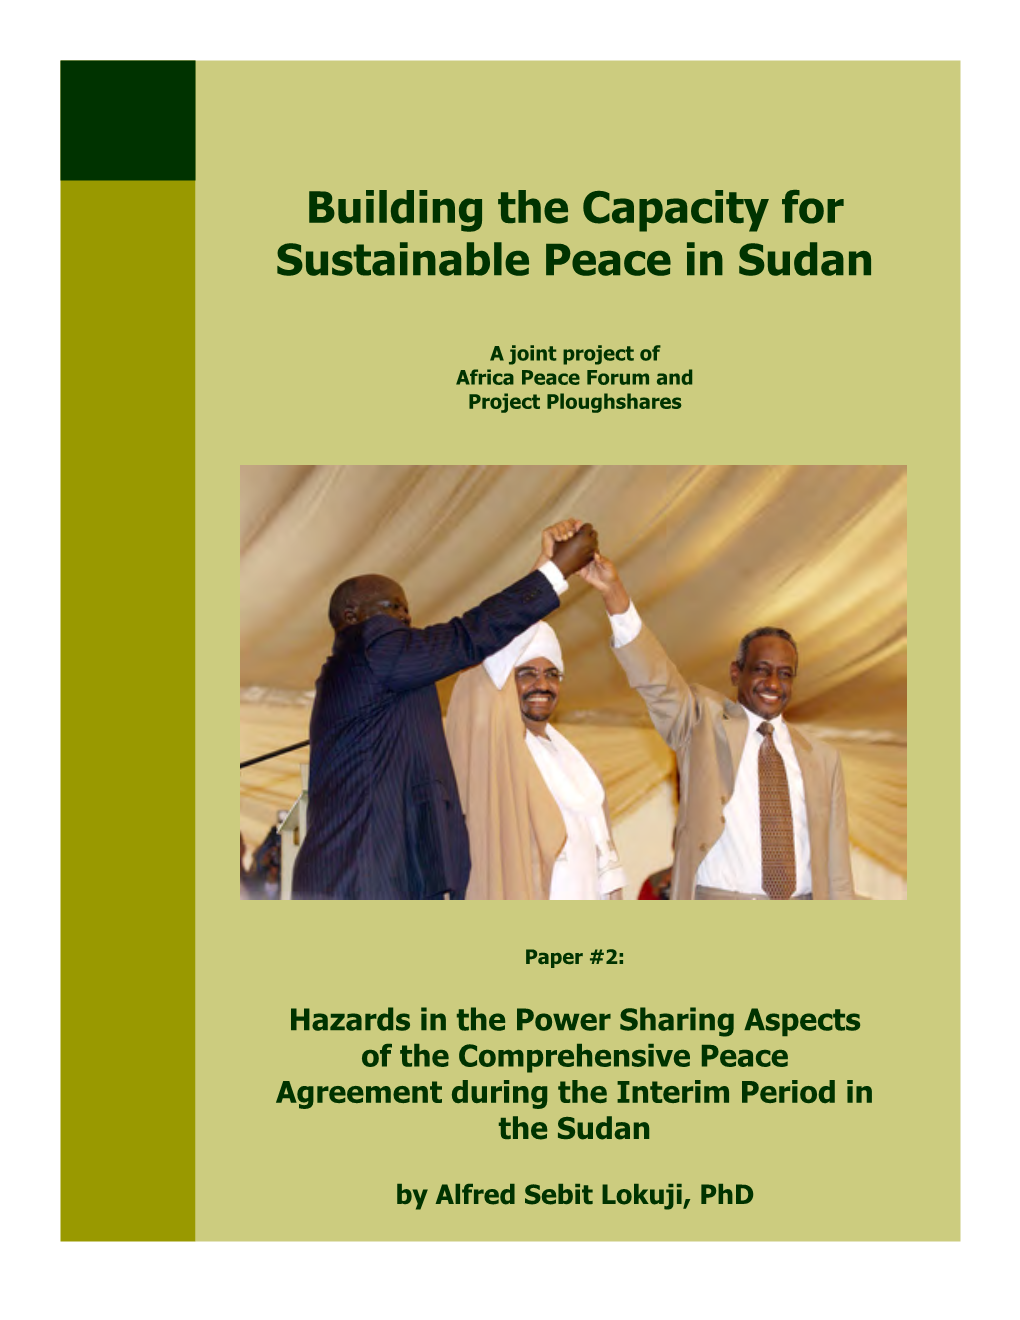 Hazards in the Power Sharing Aspects of the Comprehensive Peace Agreement During the Interim Period in the Sudan